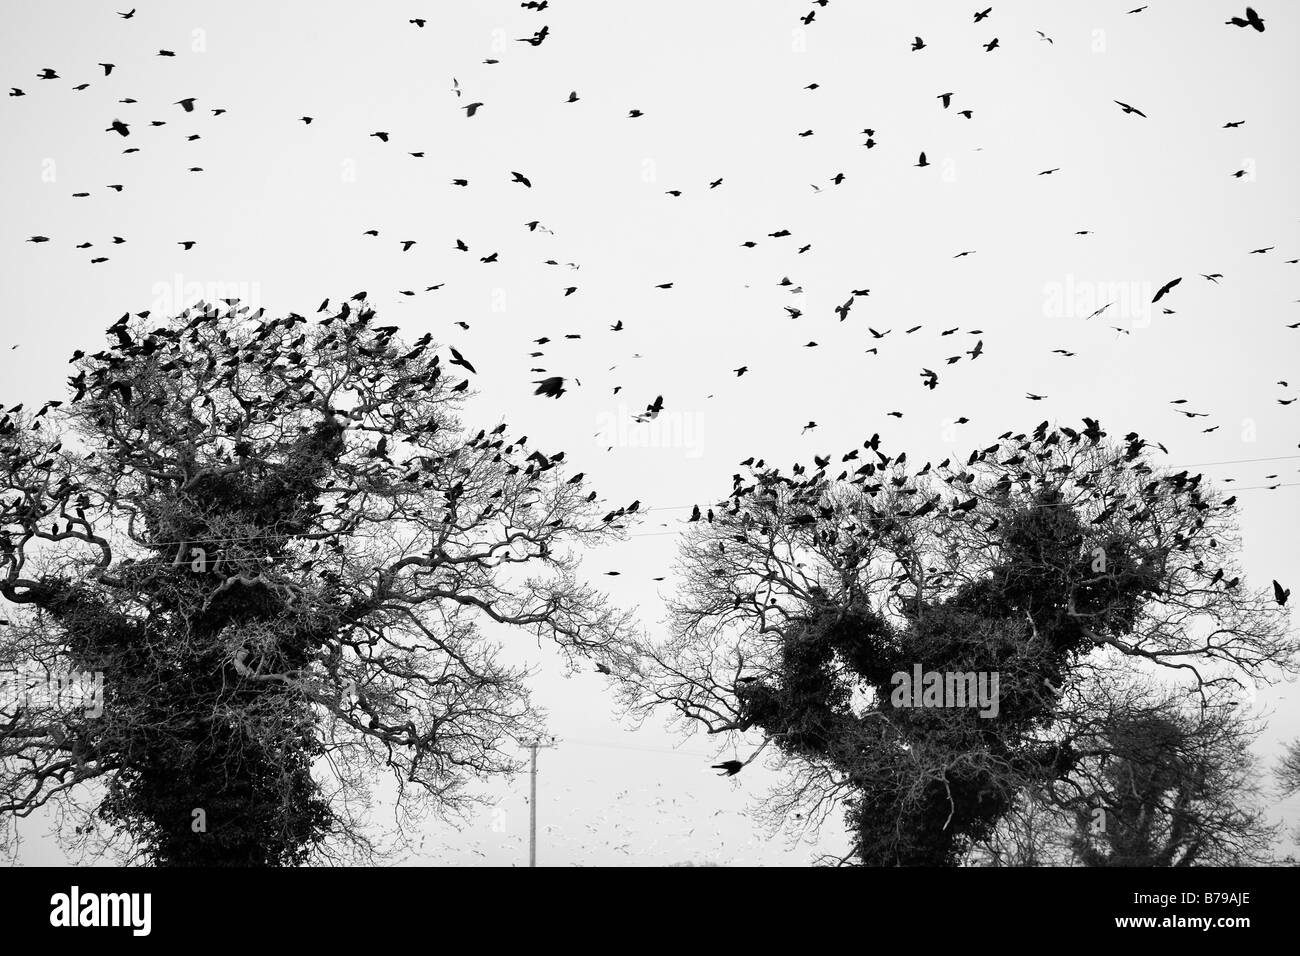 A 'Flock of Crows' gathering to roost 'Norfolk Countryside' 'Great Britain' Stock Photo